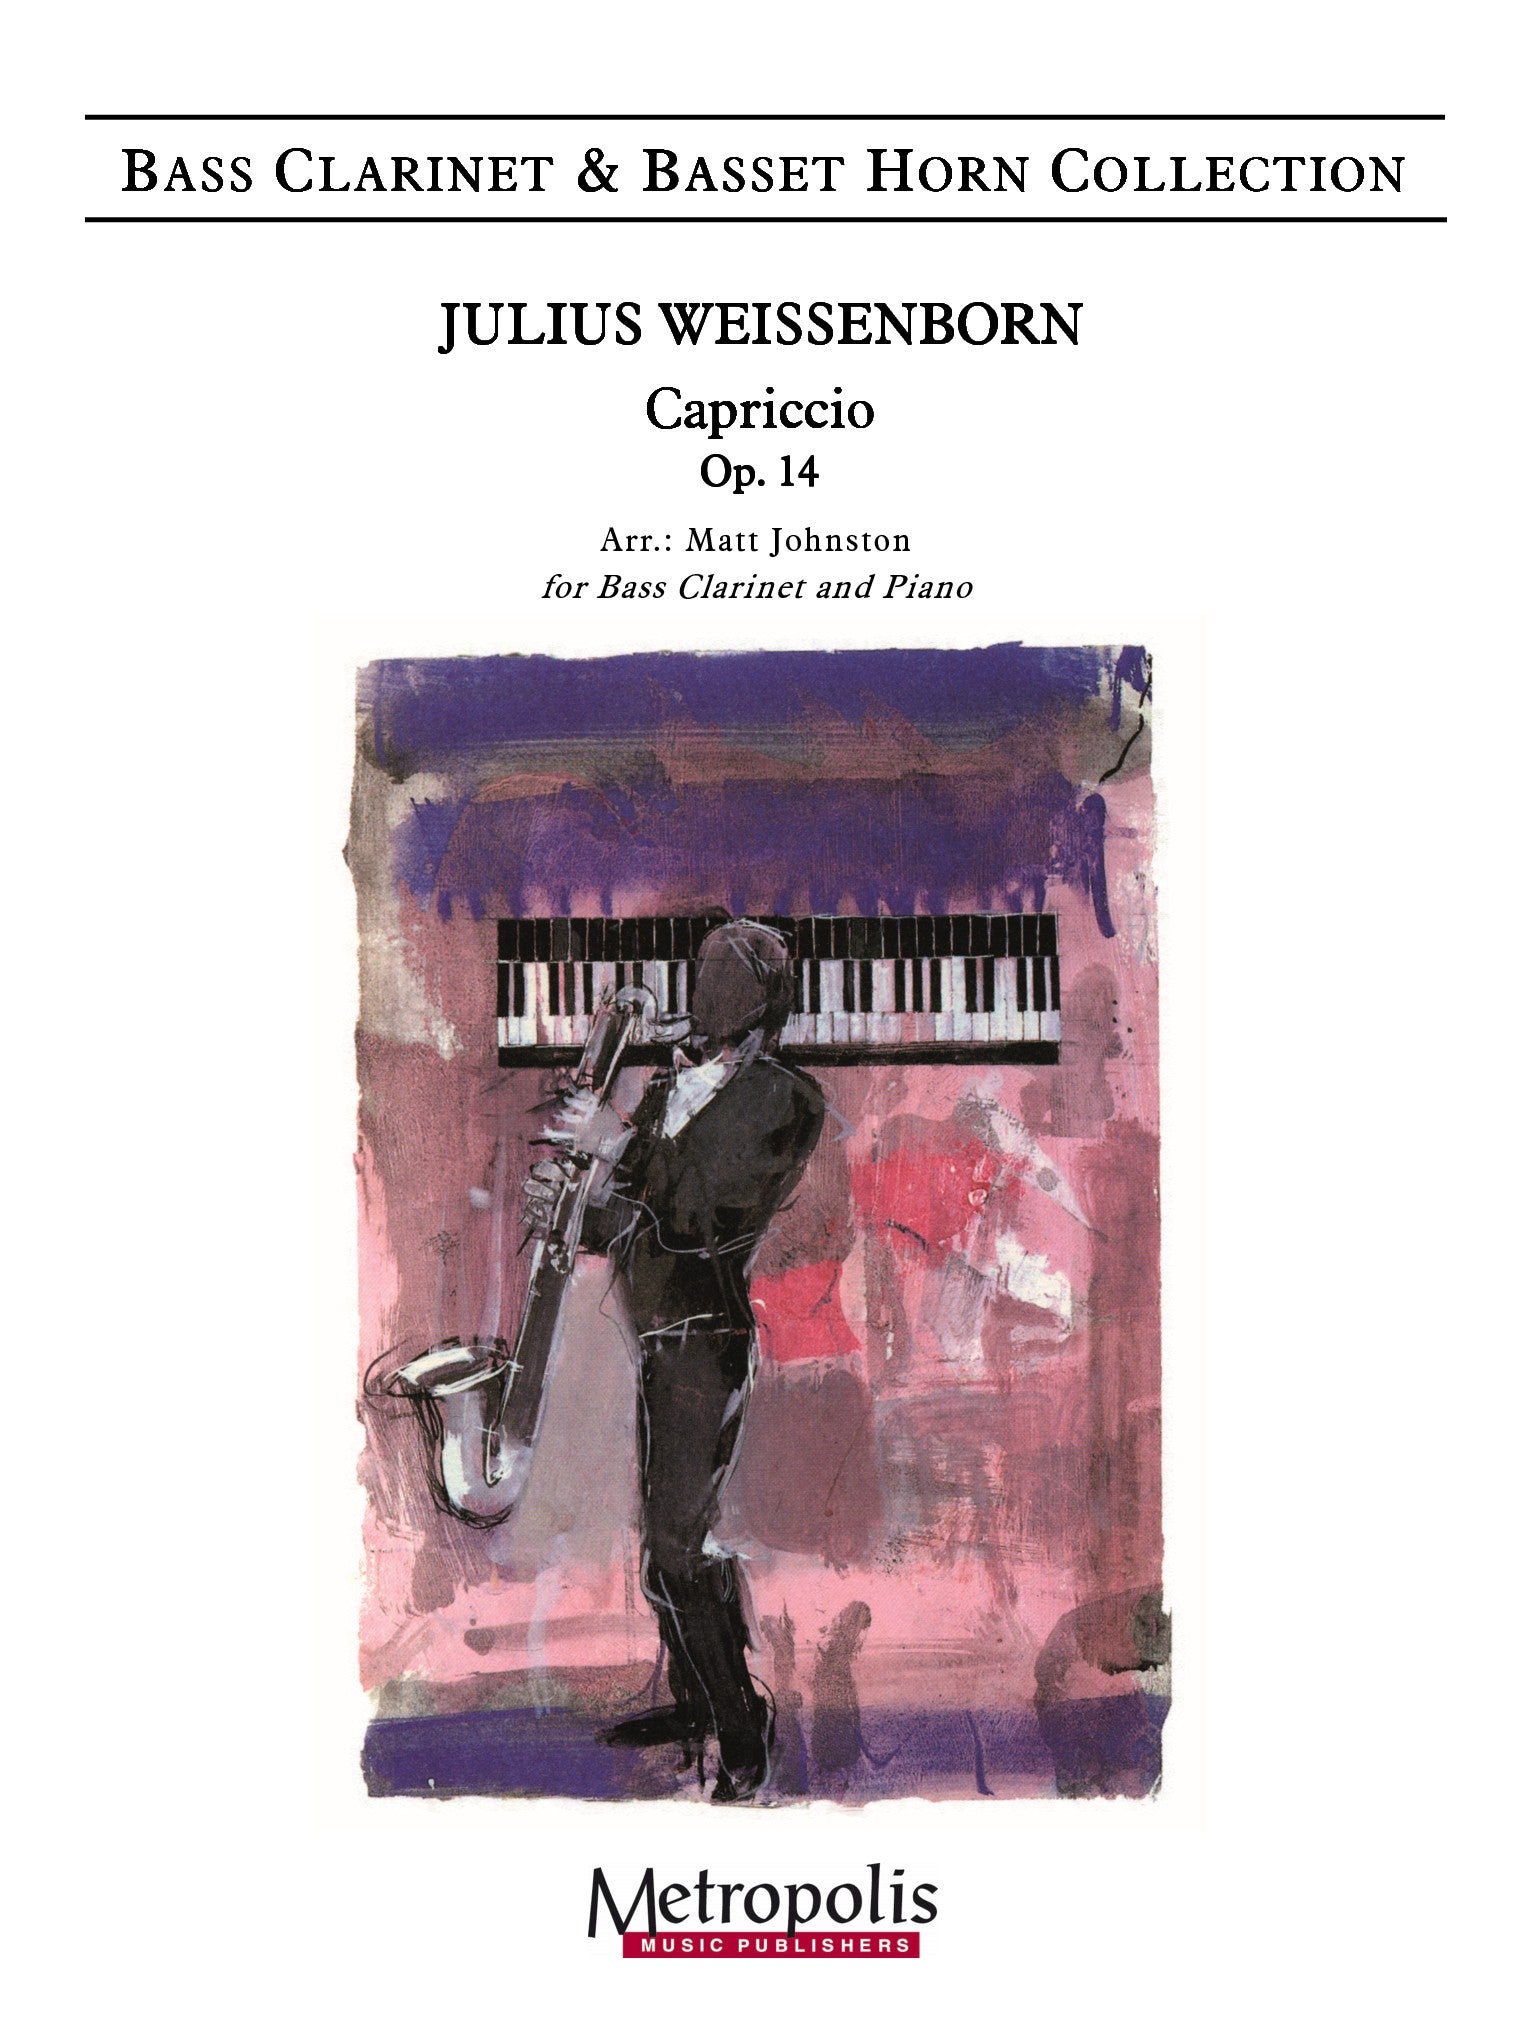 Weissenborn - Capriccio, Op. 14 for Bass Clarinet and Piano